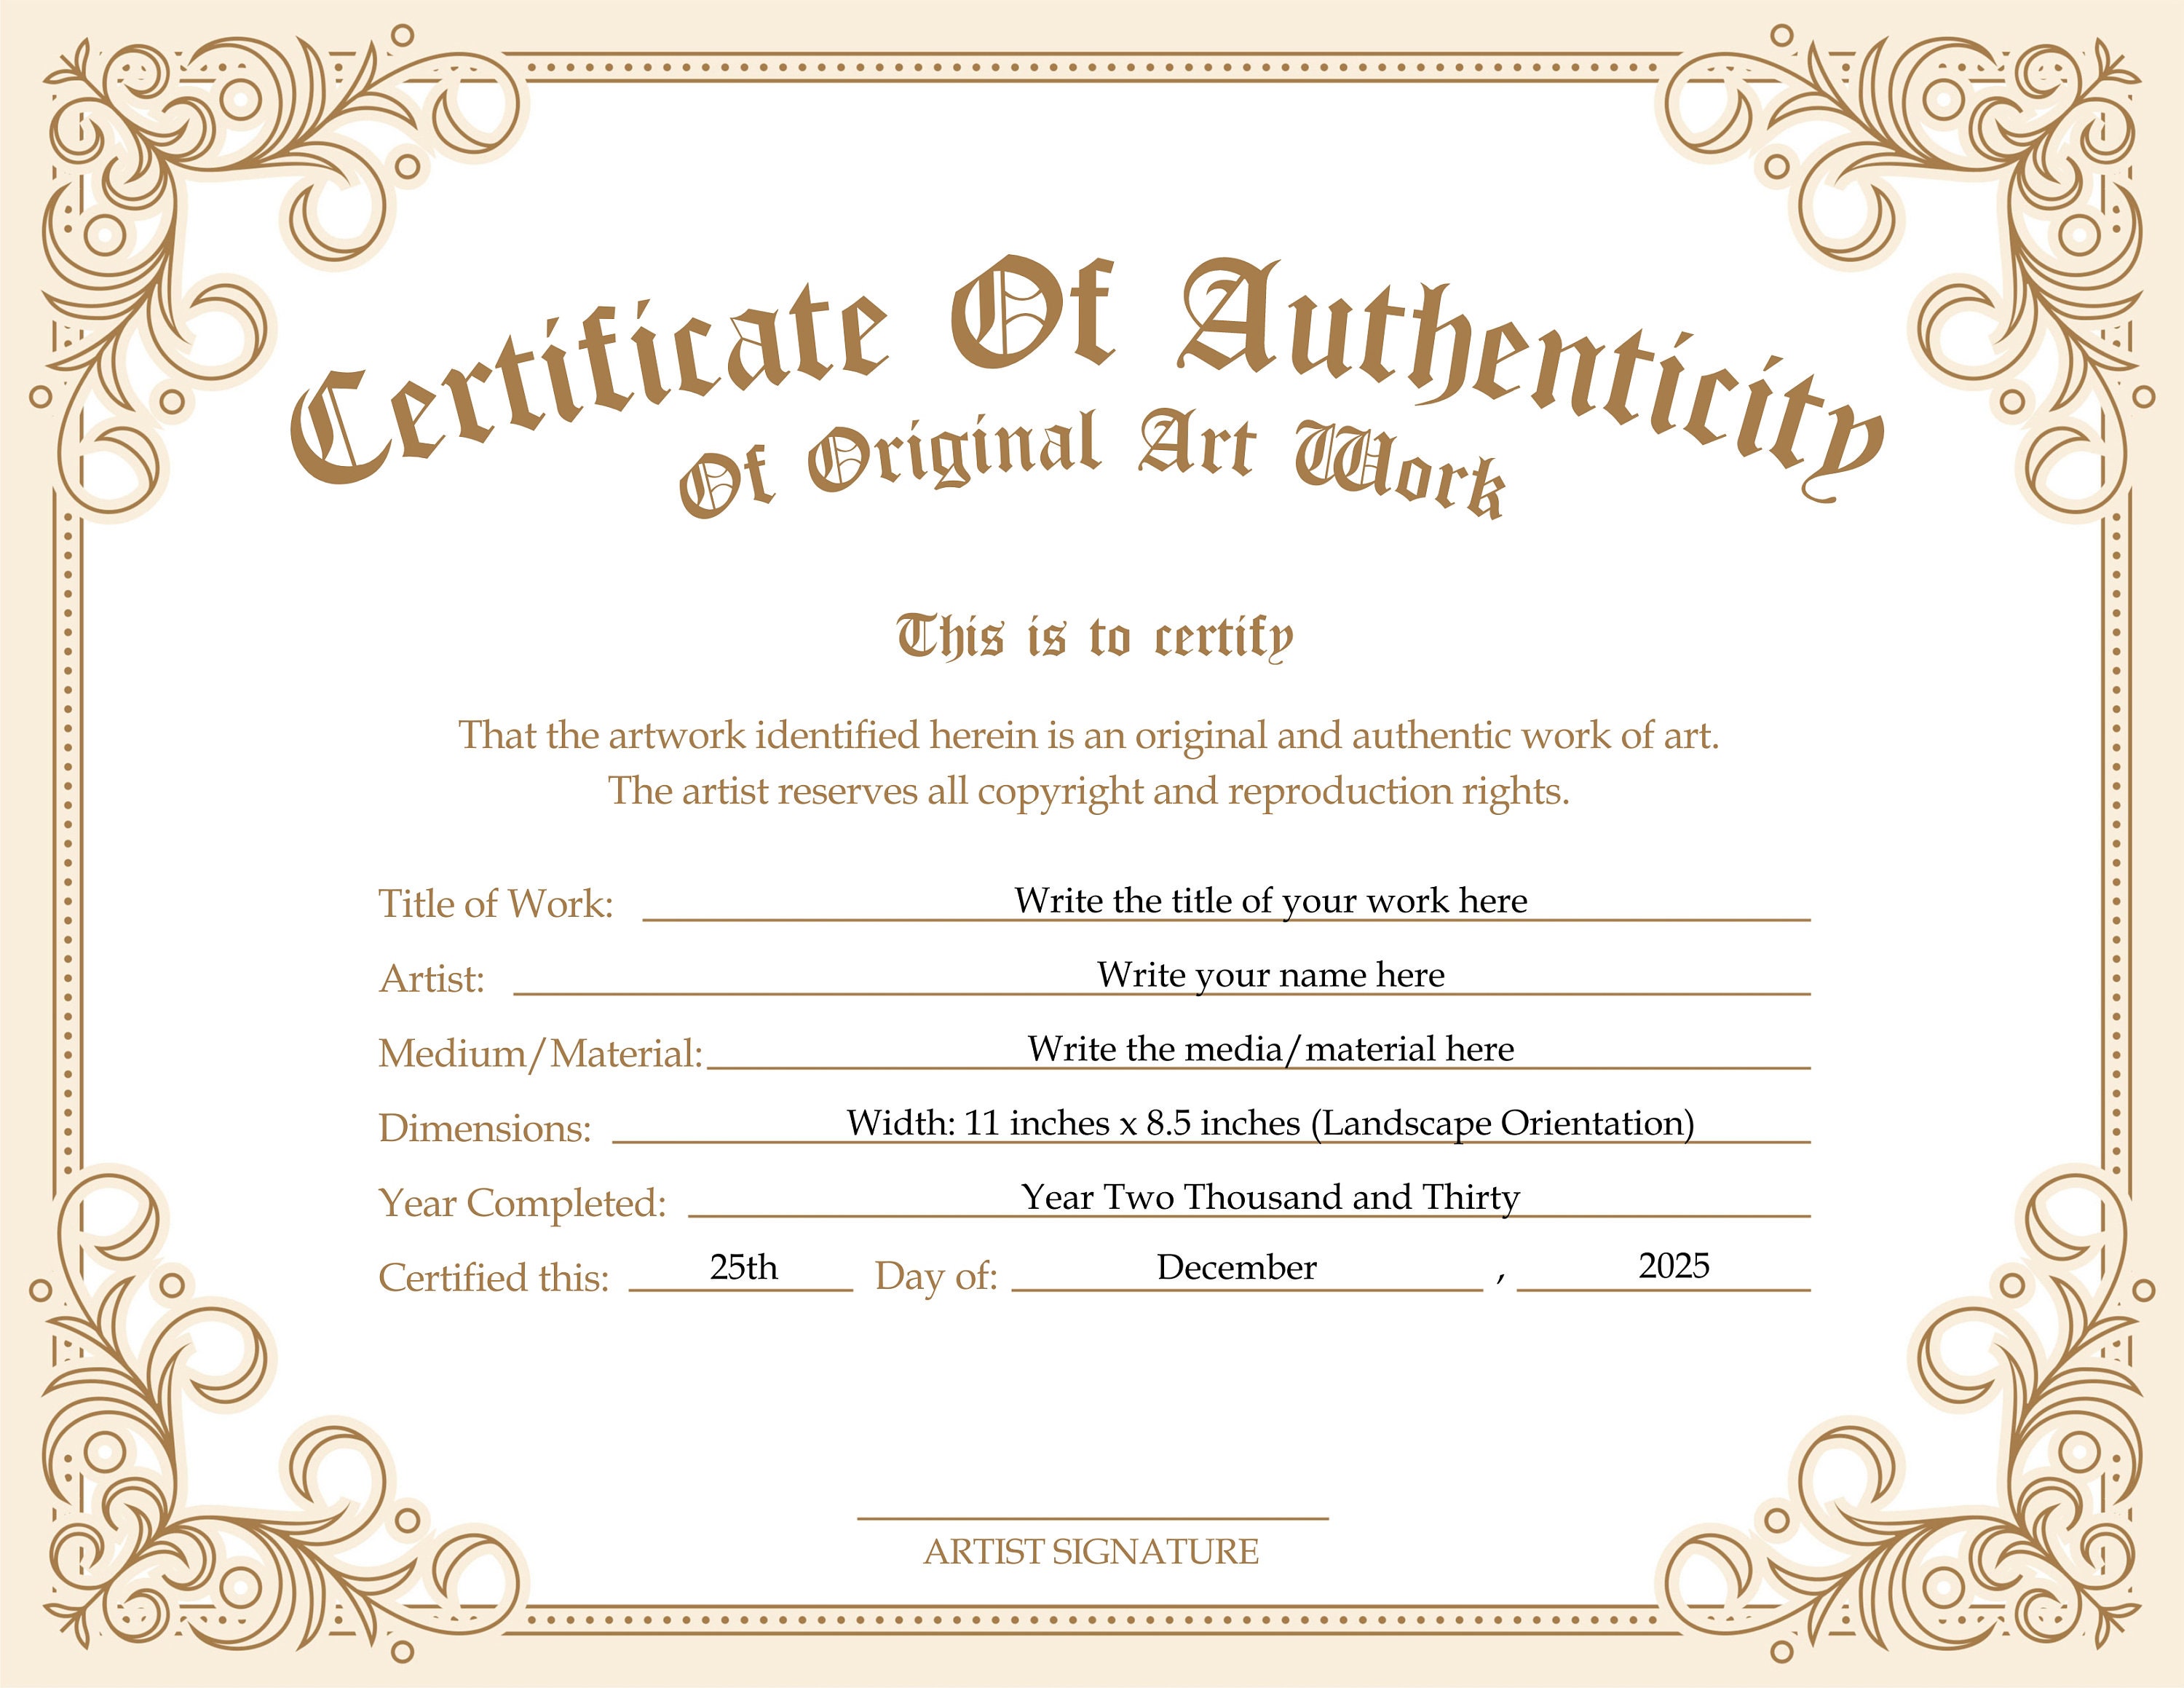 Certificate Authenticity Form - Fill Online, Printable, Fillable